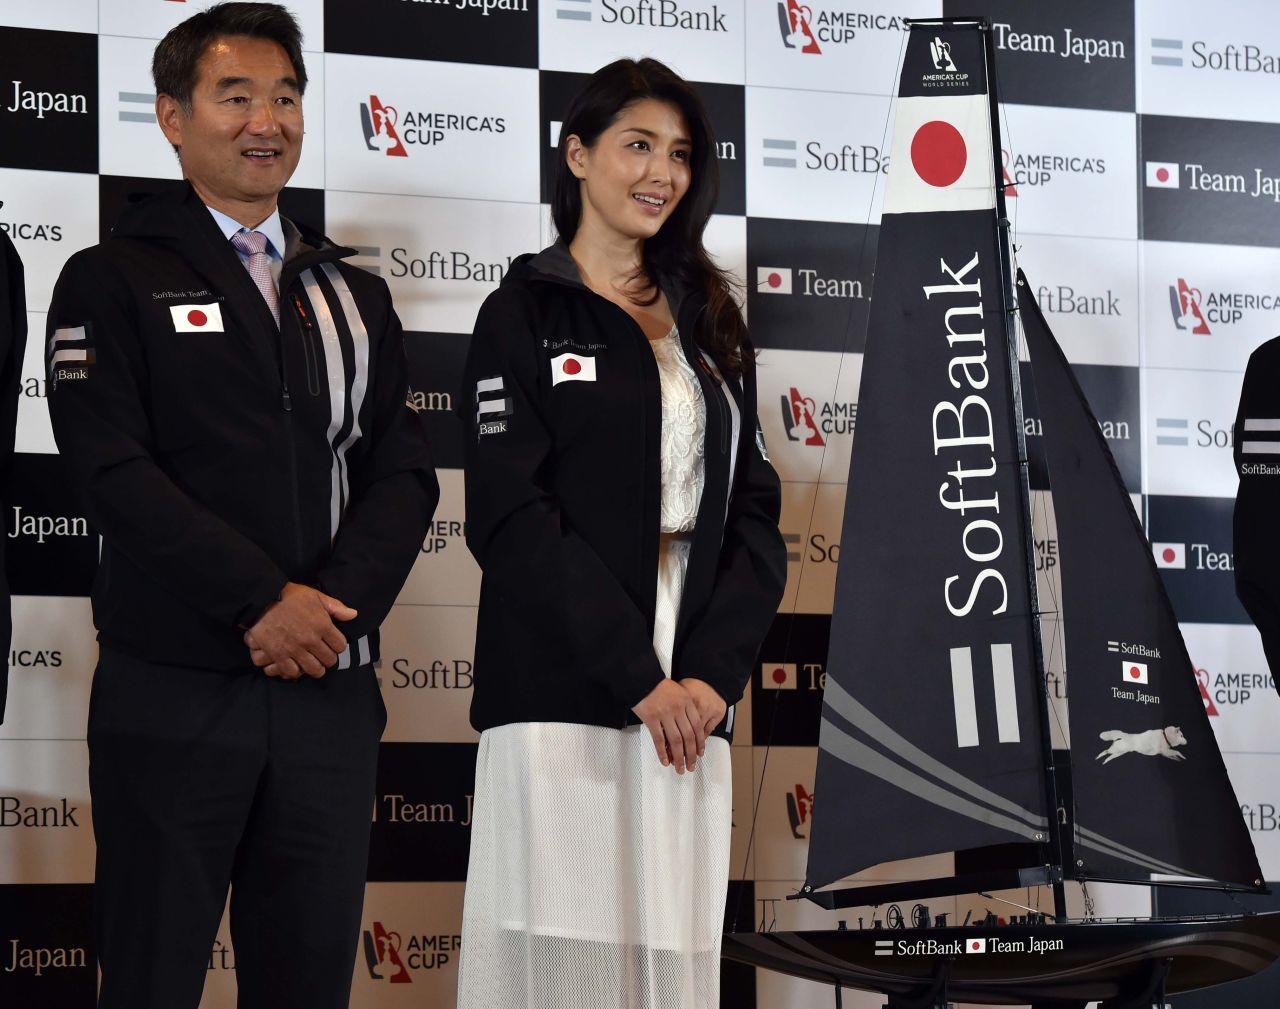 Barker will be supported by general manager Kazuhiko Sofuku. The 49-year-old is taking part in his fourth America's Cup, having made his debut in 1995 as bowman on Nippon Challenge.  